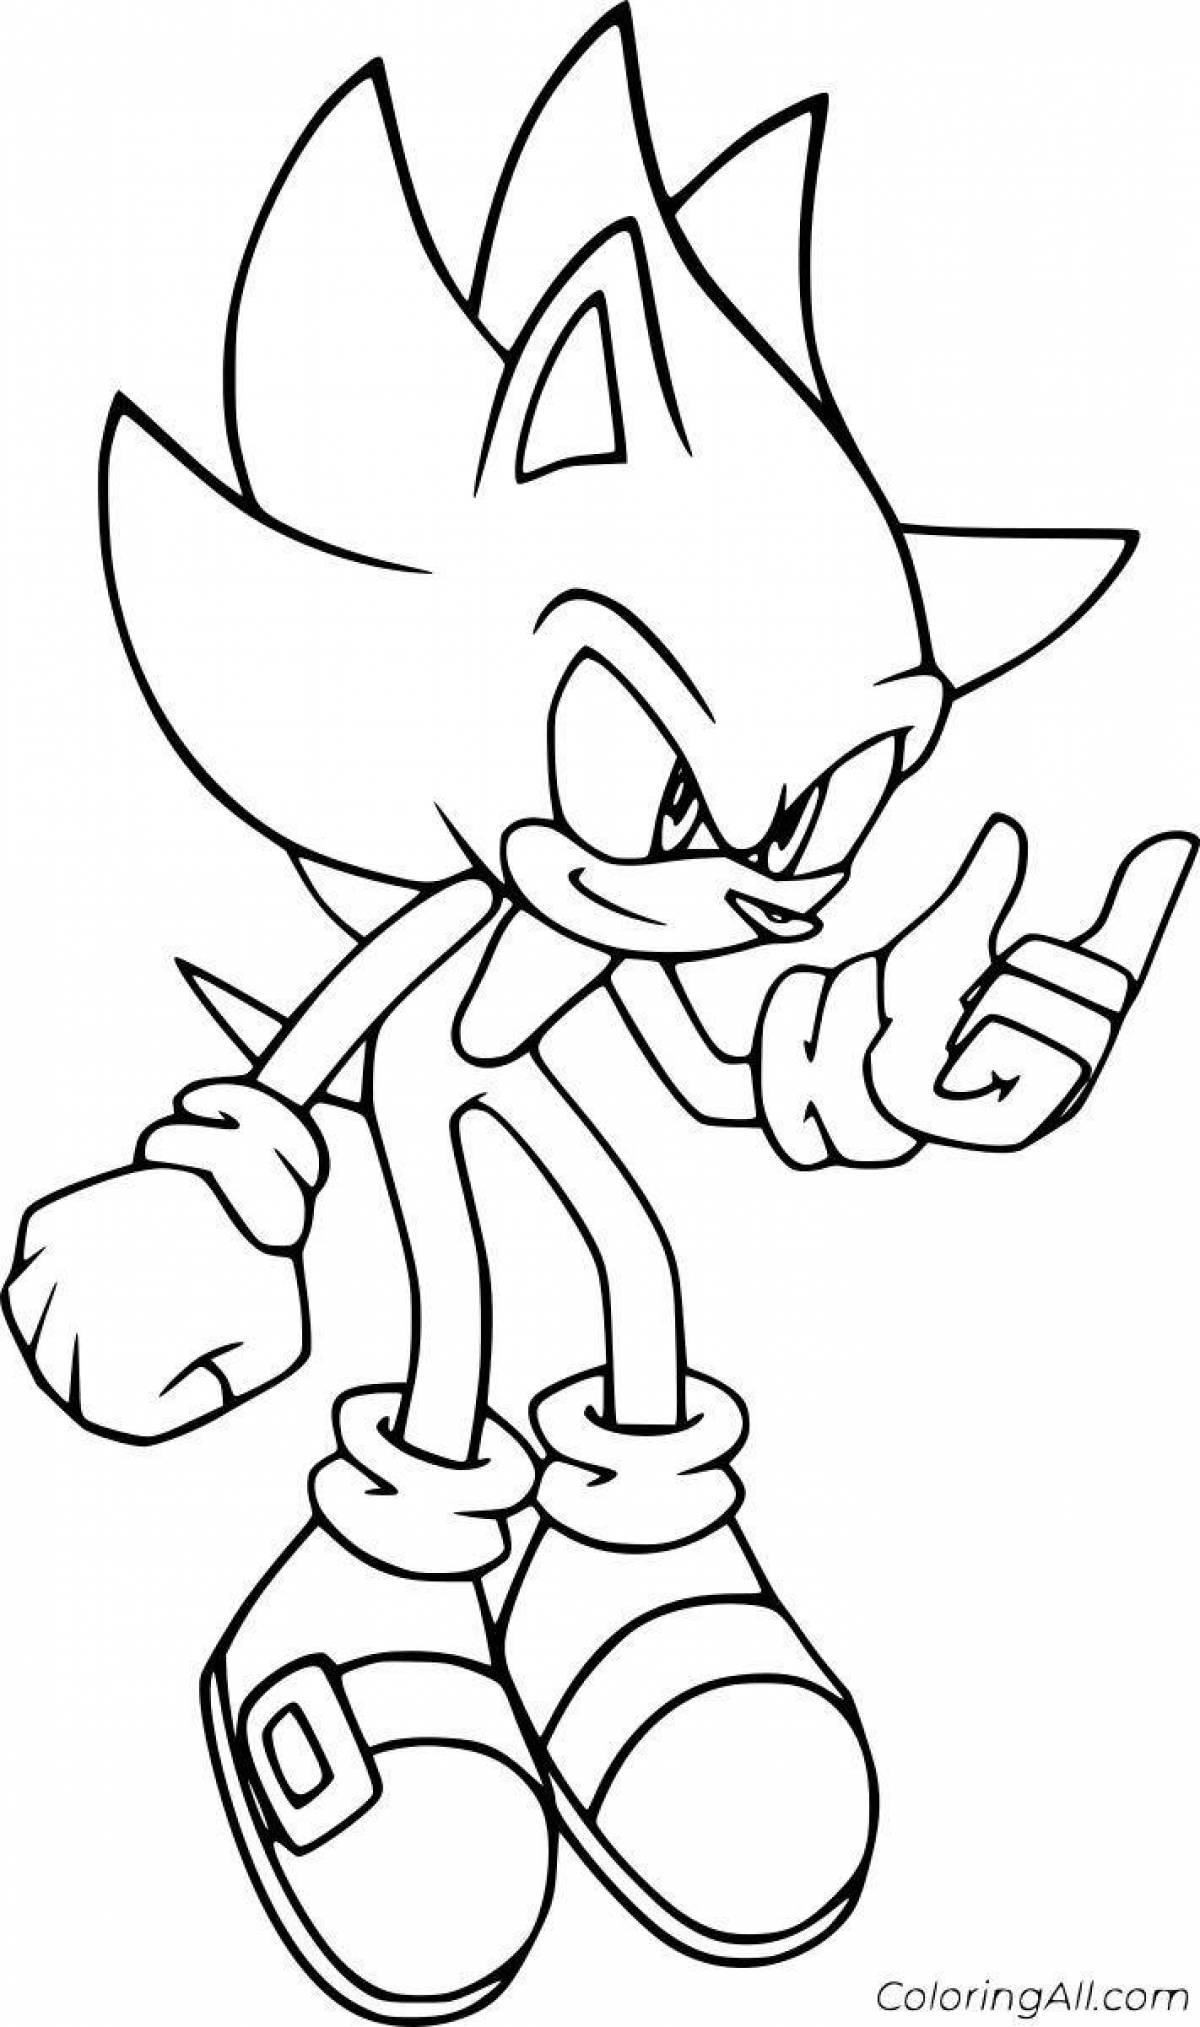 Great coloring black sonic